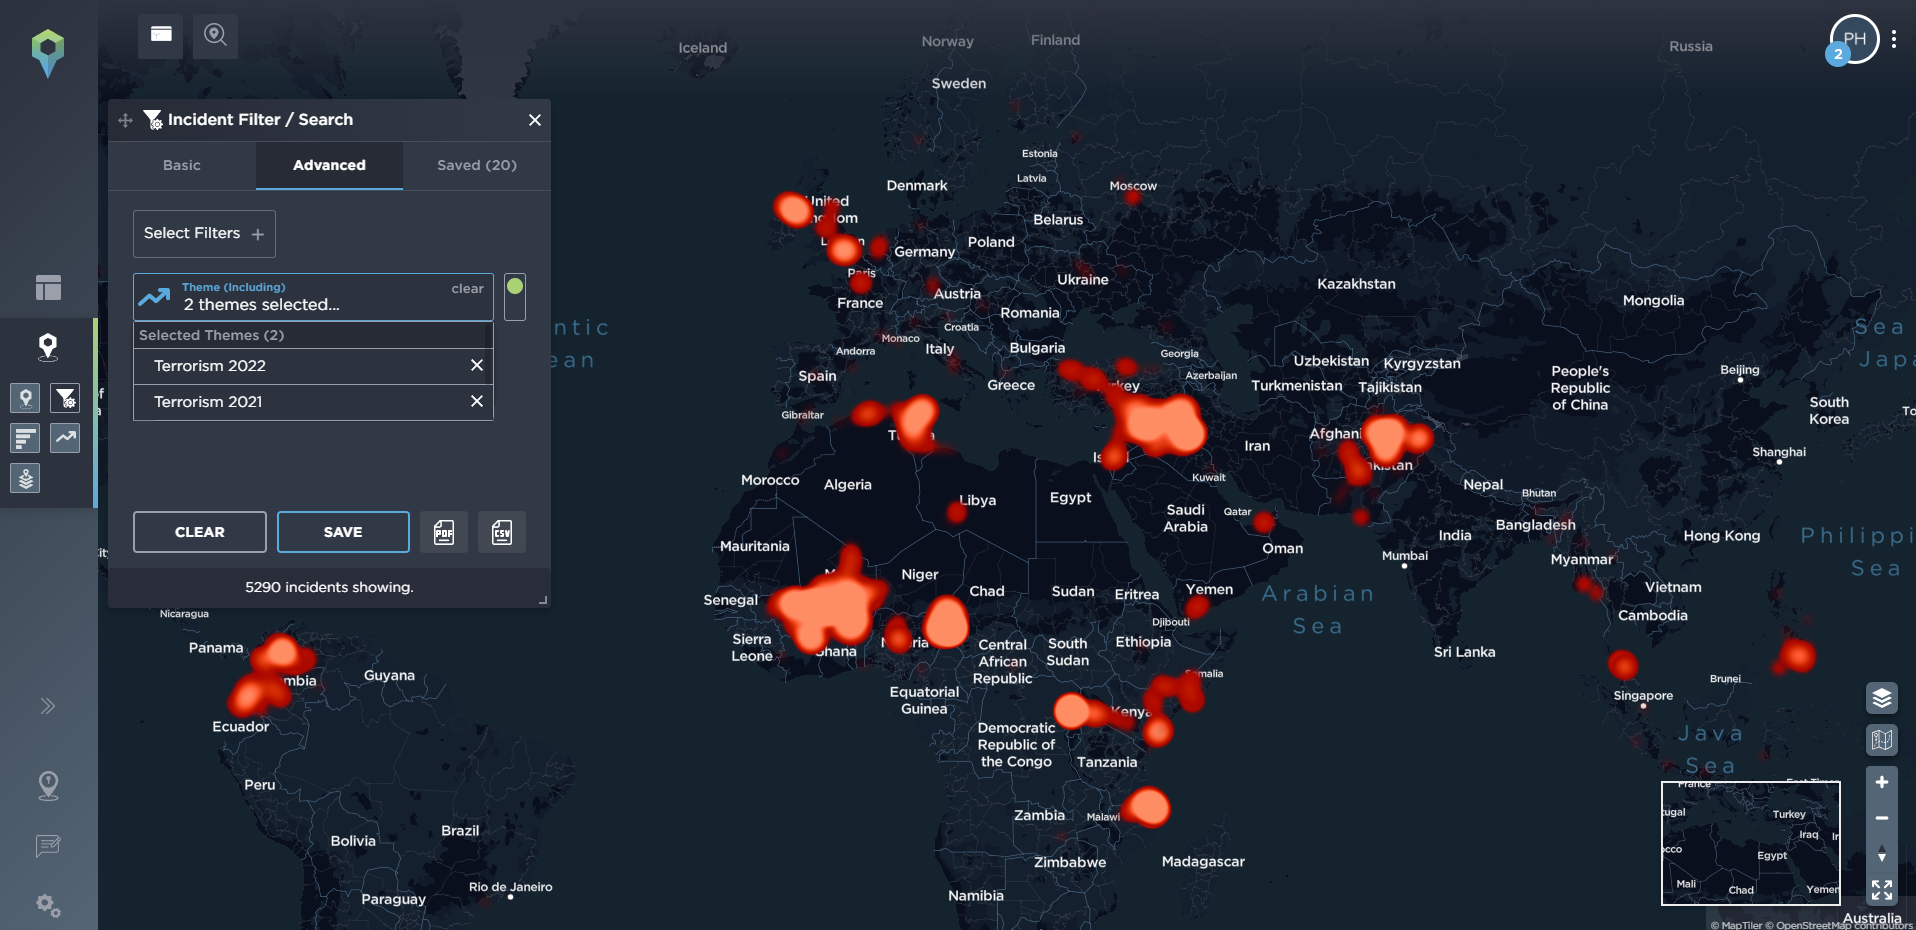 Tracking terrorist activity most violent areas in the world armed conflict using threat intelligence software